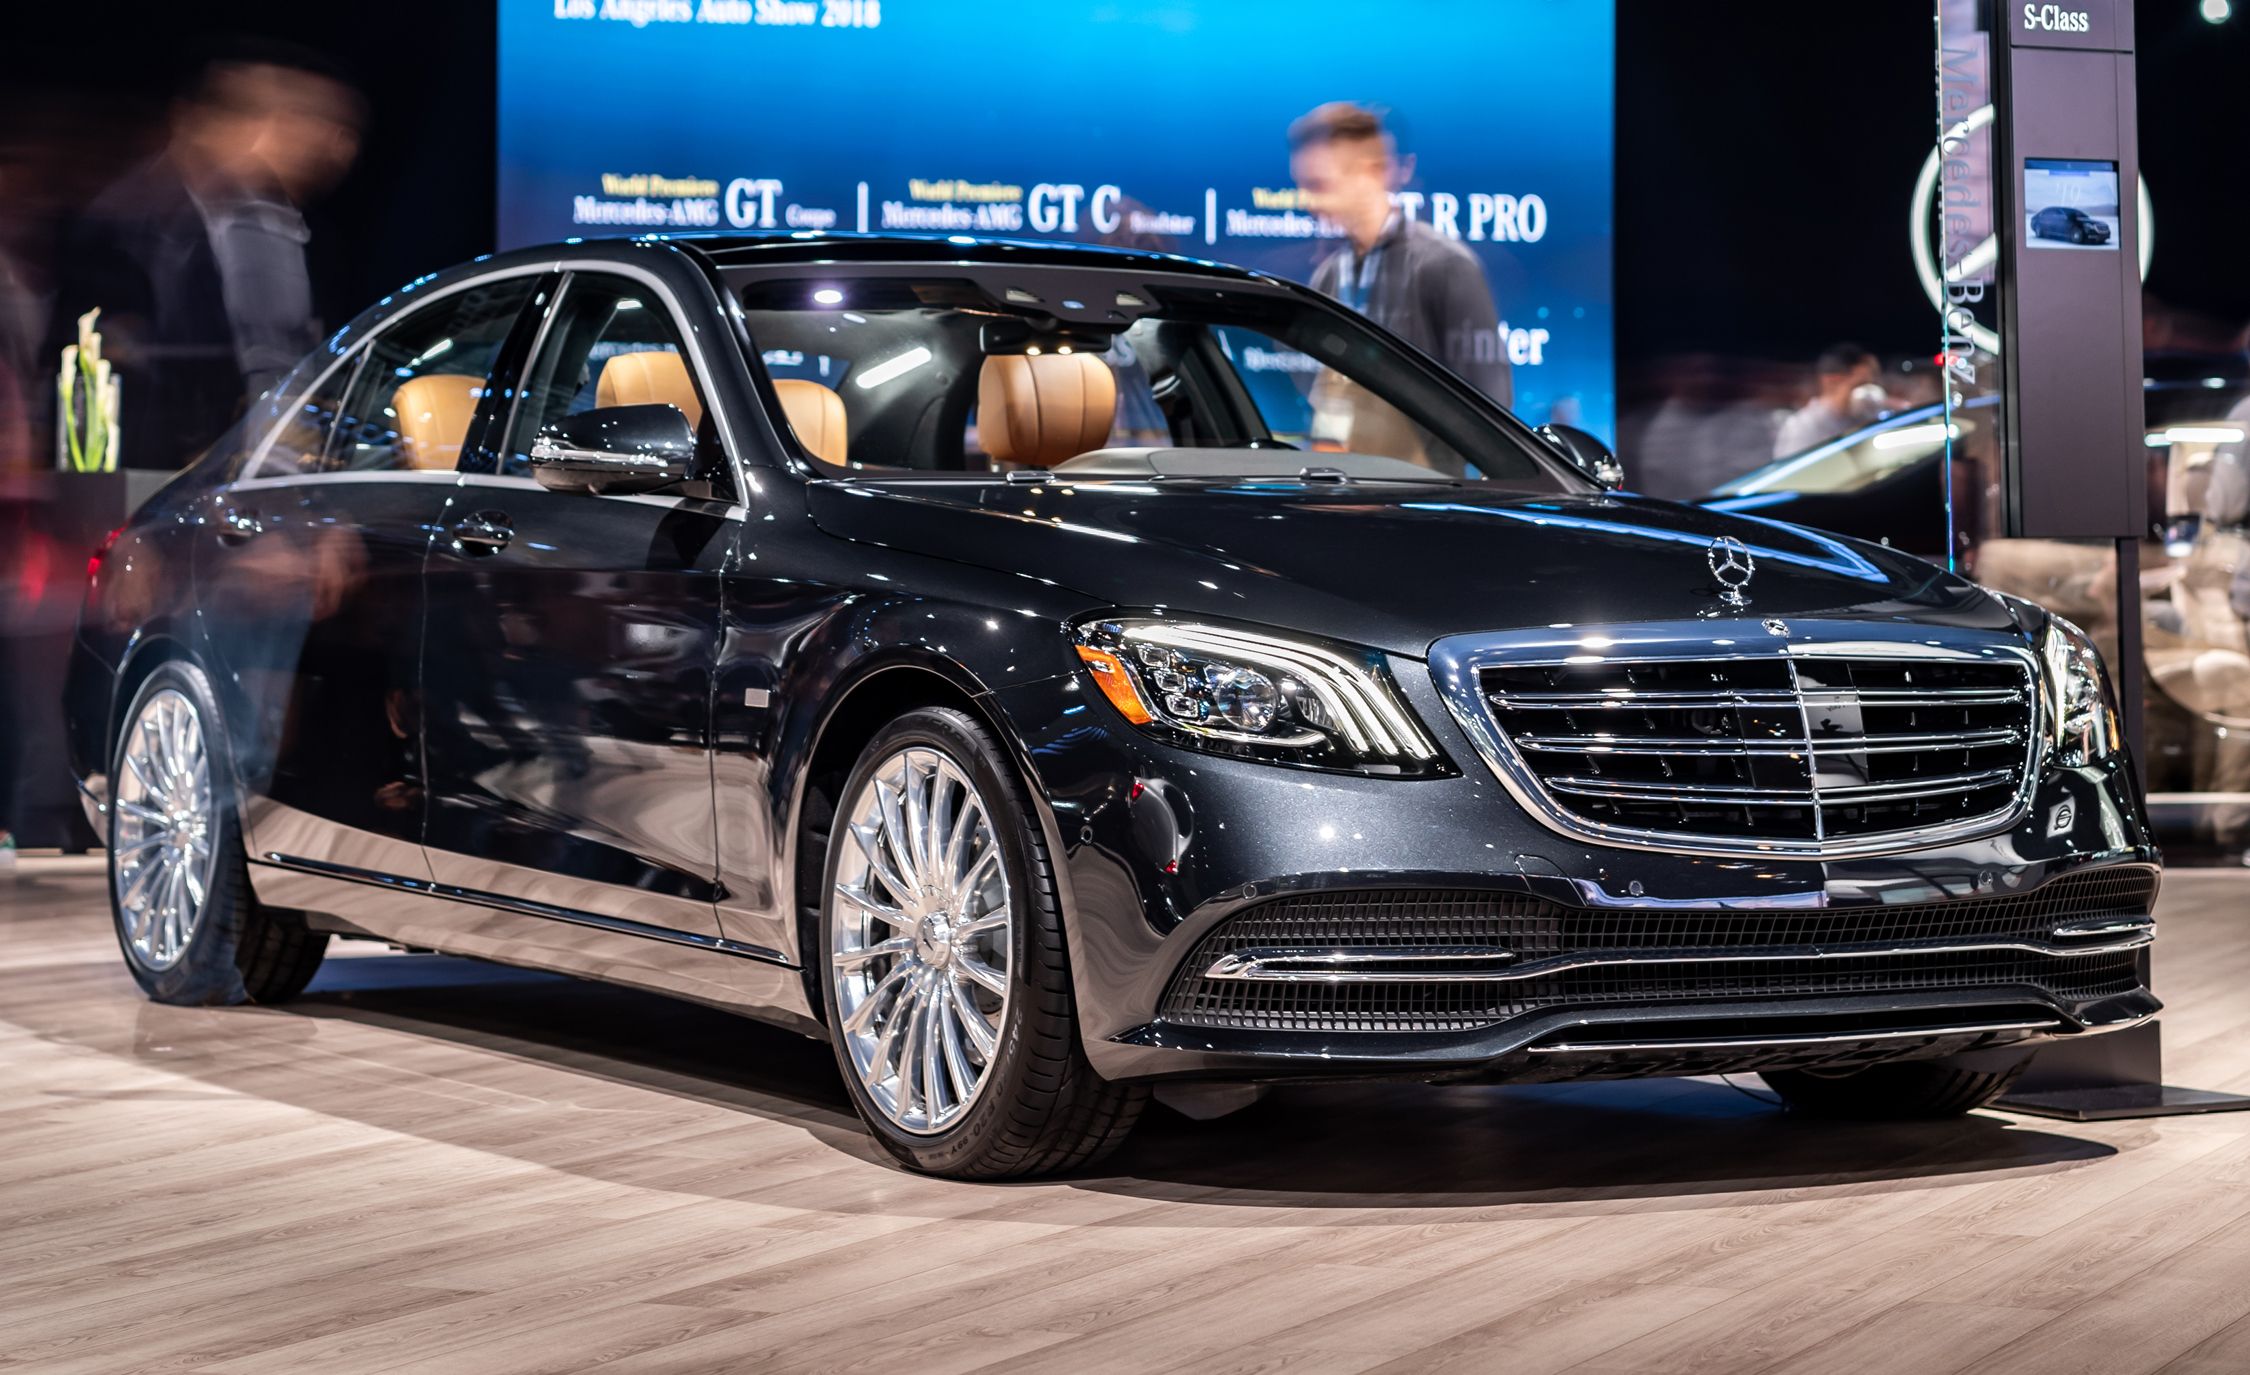 Mercedes-Benz S-class Concours - Limited-Edition Luxury Car